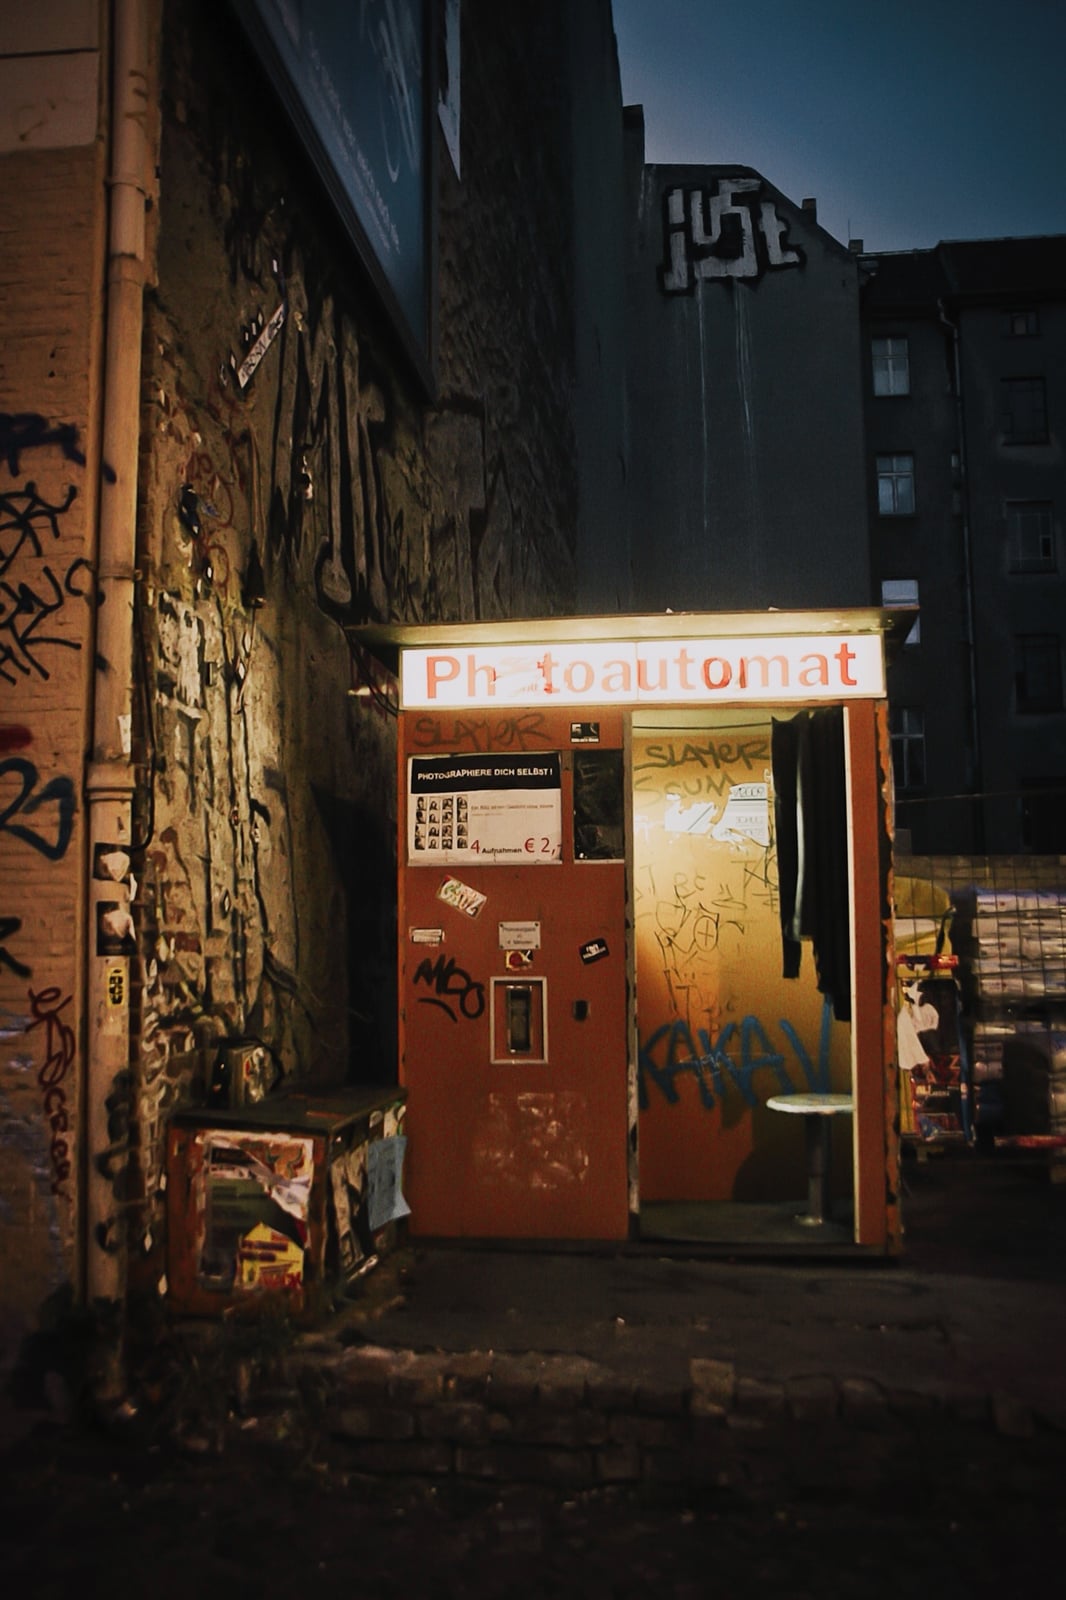 photo booth and its illuminated sign in a Berlin street at night